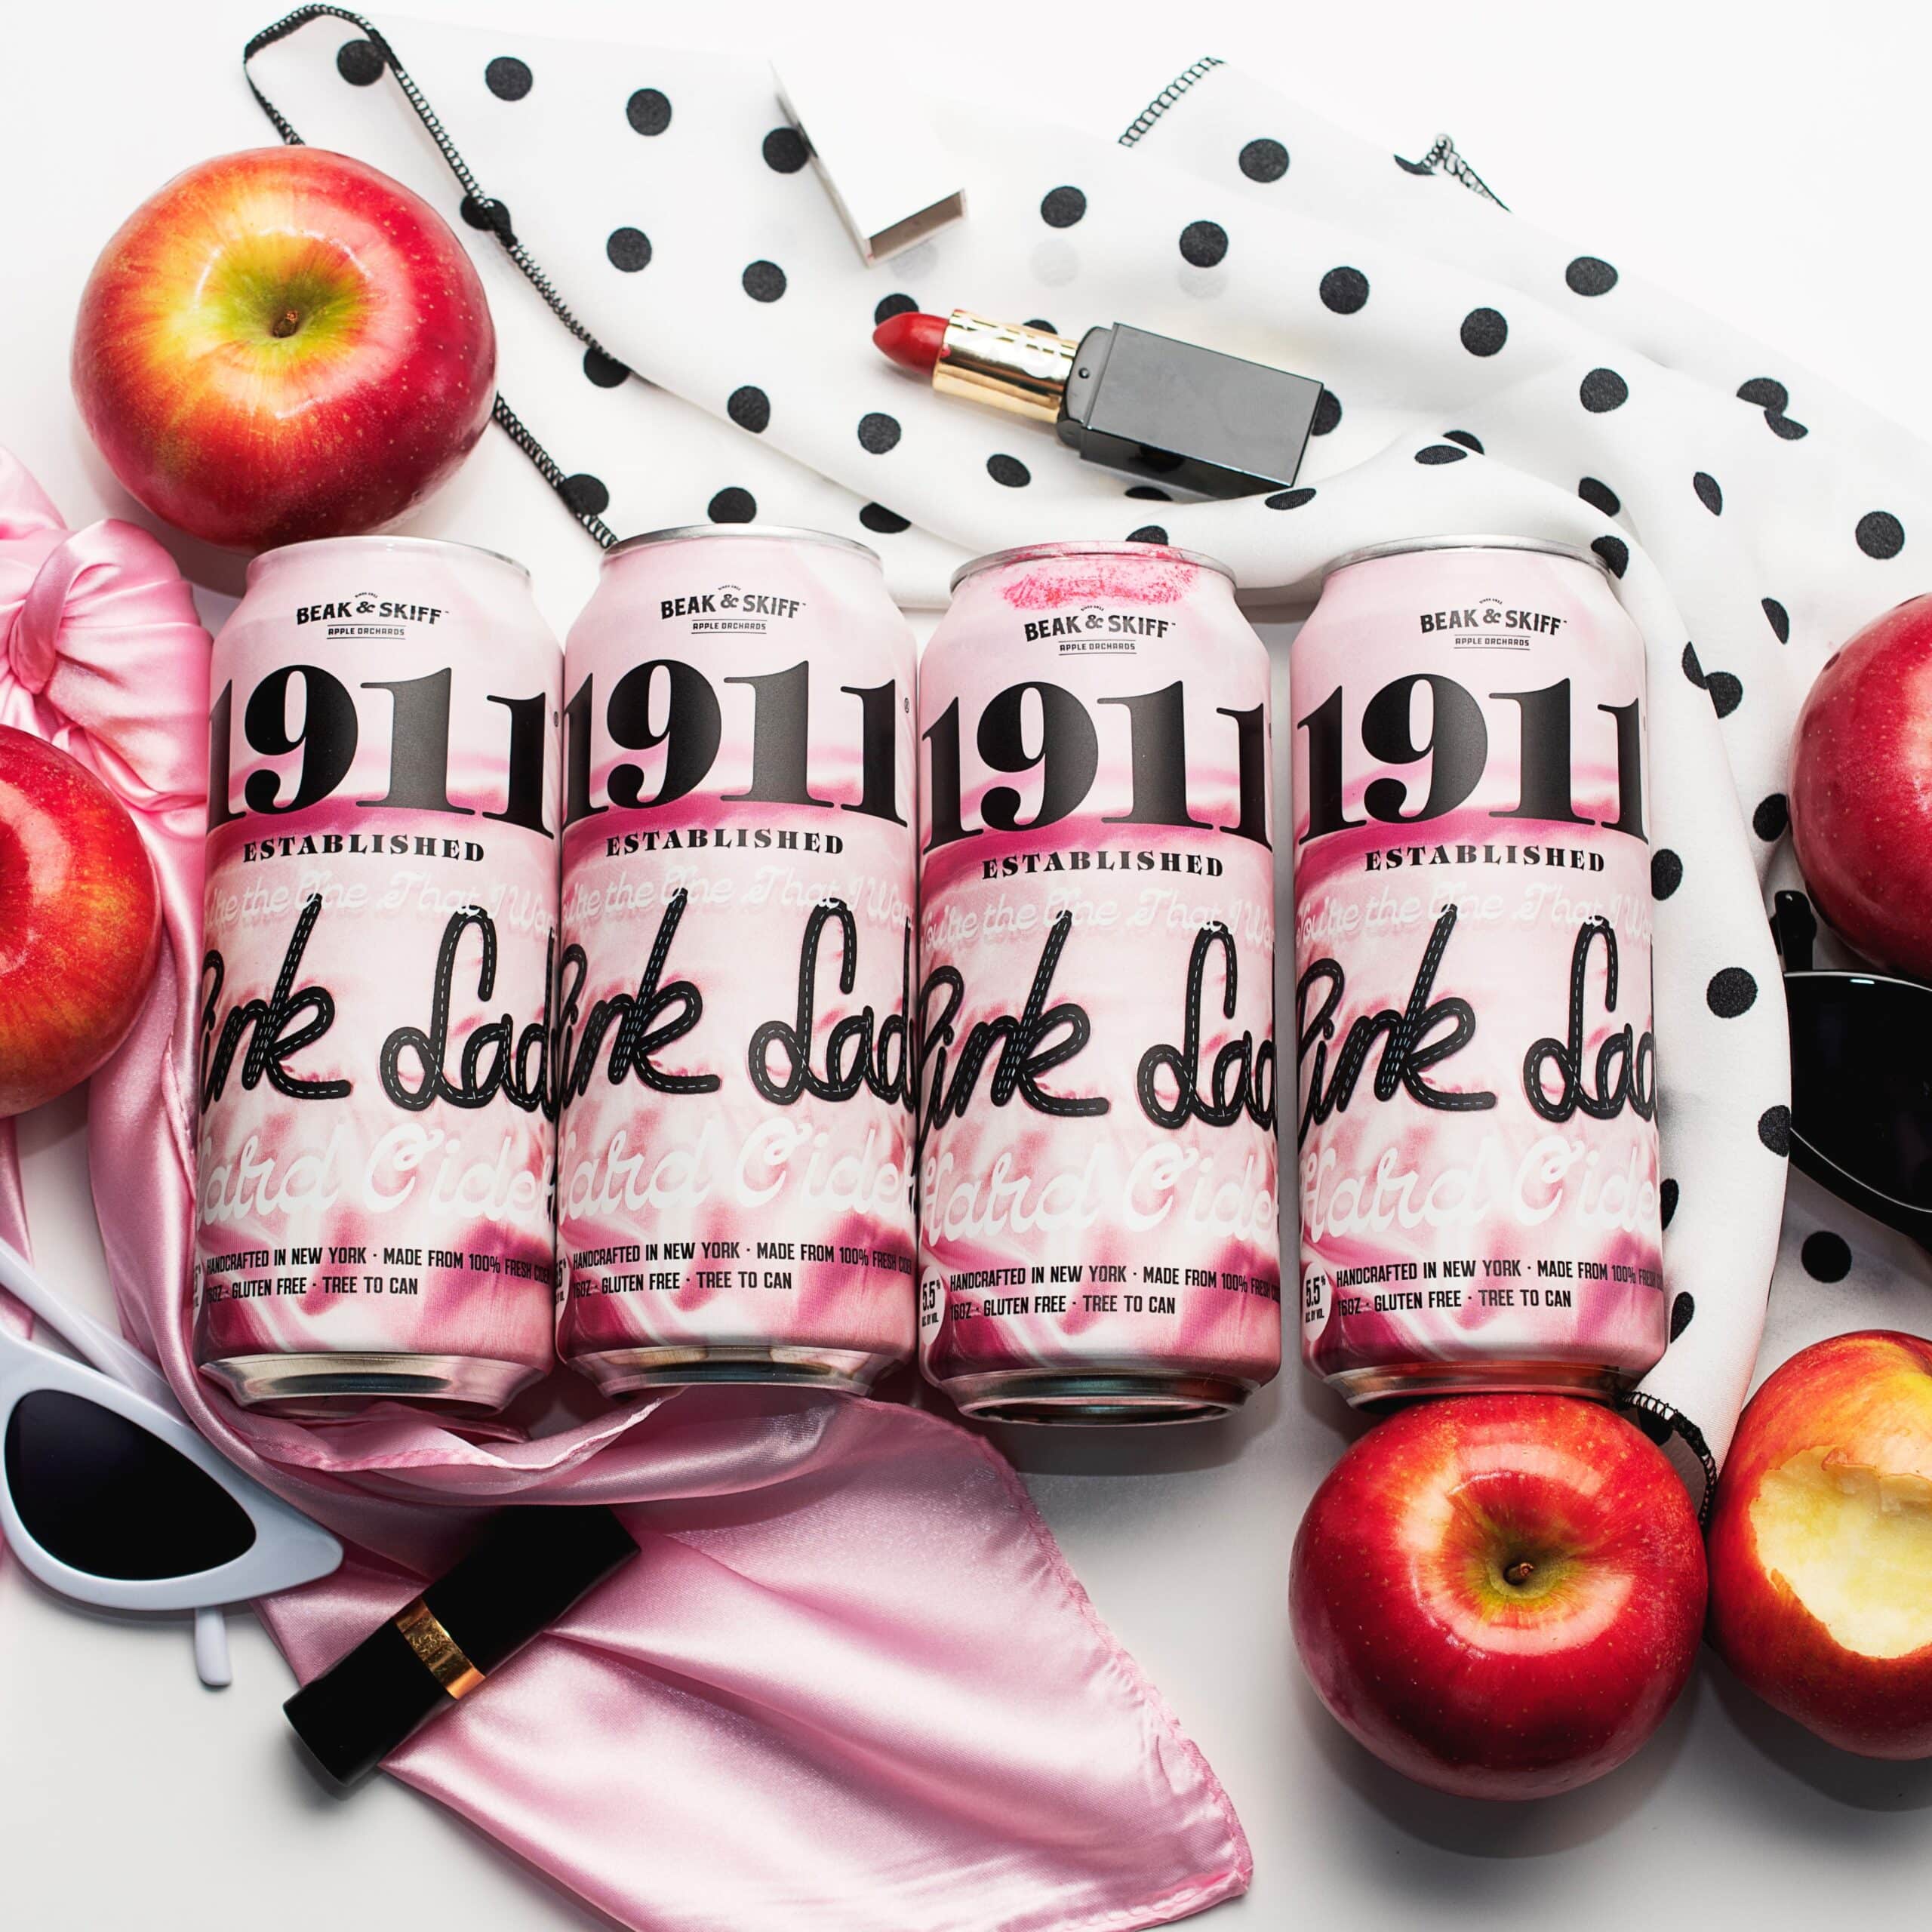 1911 Established Launches Pink Lady Cider to Benefit Rescue Mission’s Whitney House